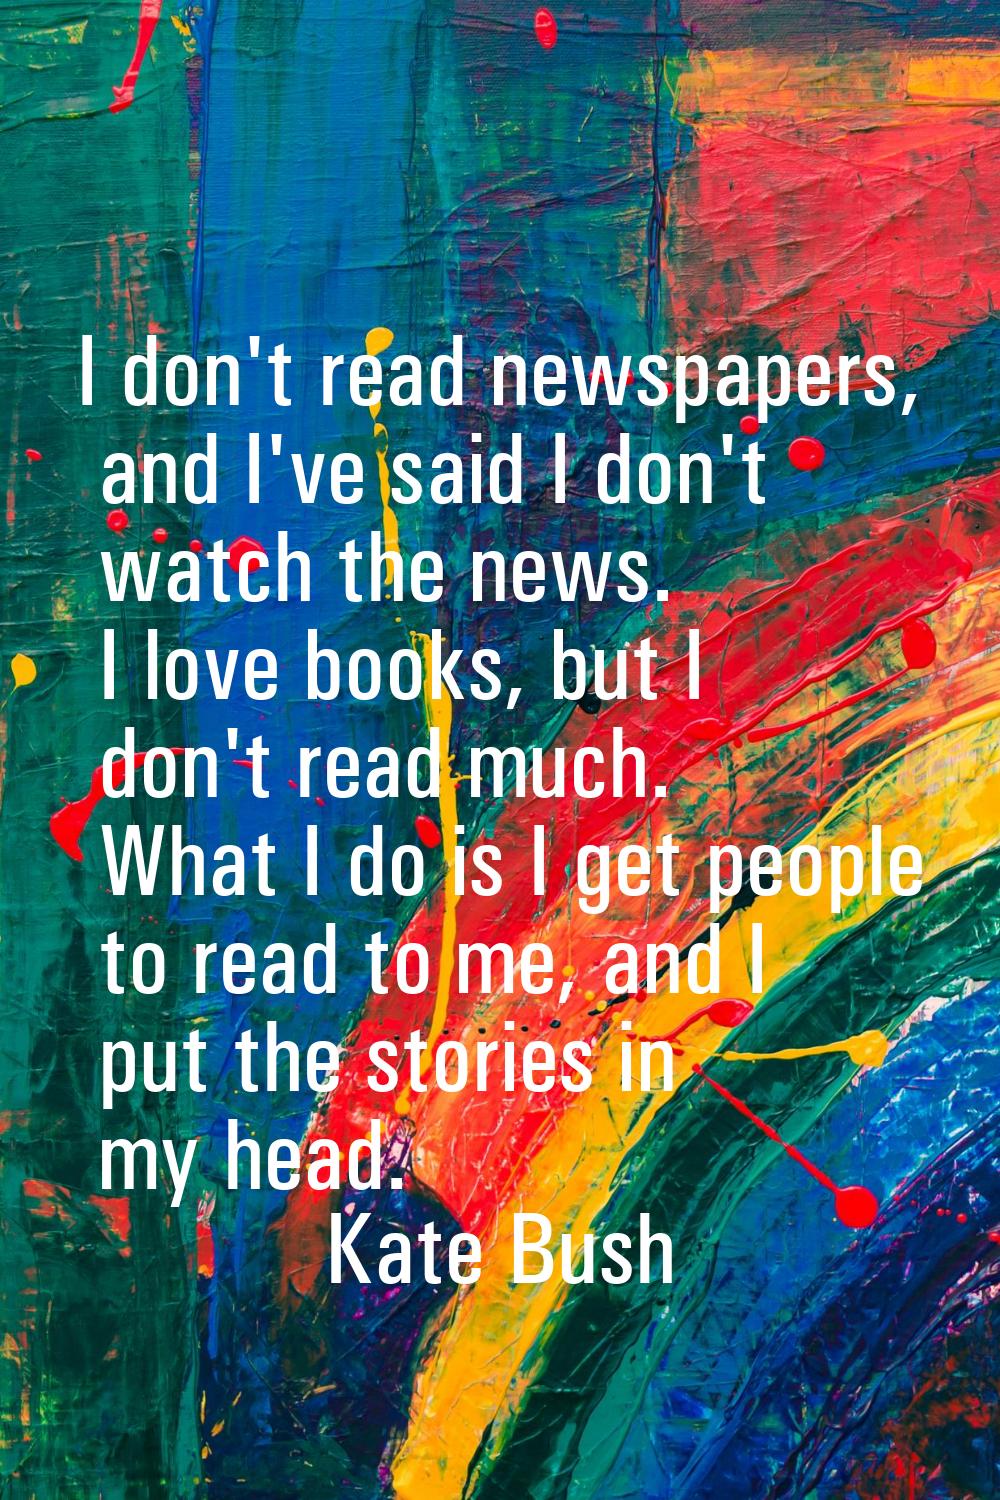 I don't read newspapers, and I've said I don't watch the news. I love books, but I don't read much.